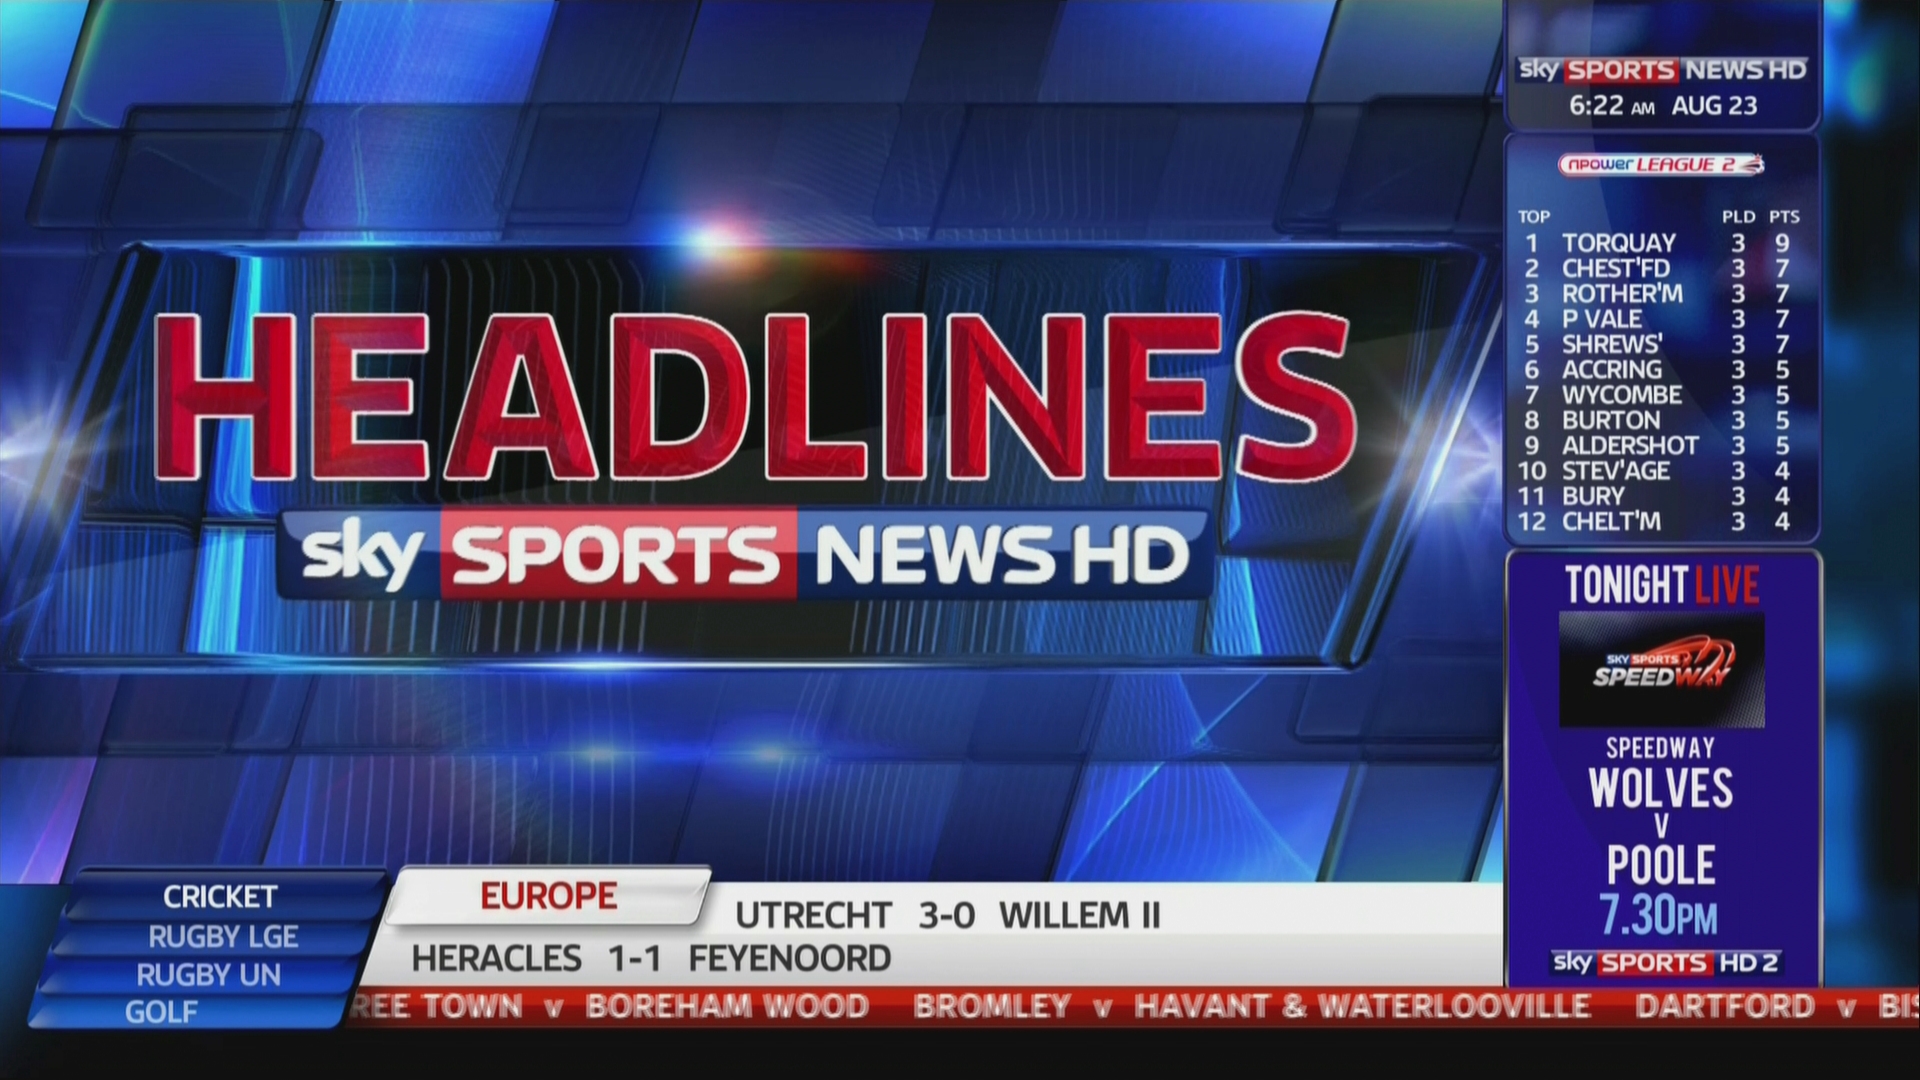 Sky Sports News HD: Now widescreen and HD! - Page 7 - TV Forum1920 x 1080